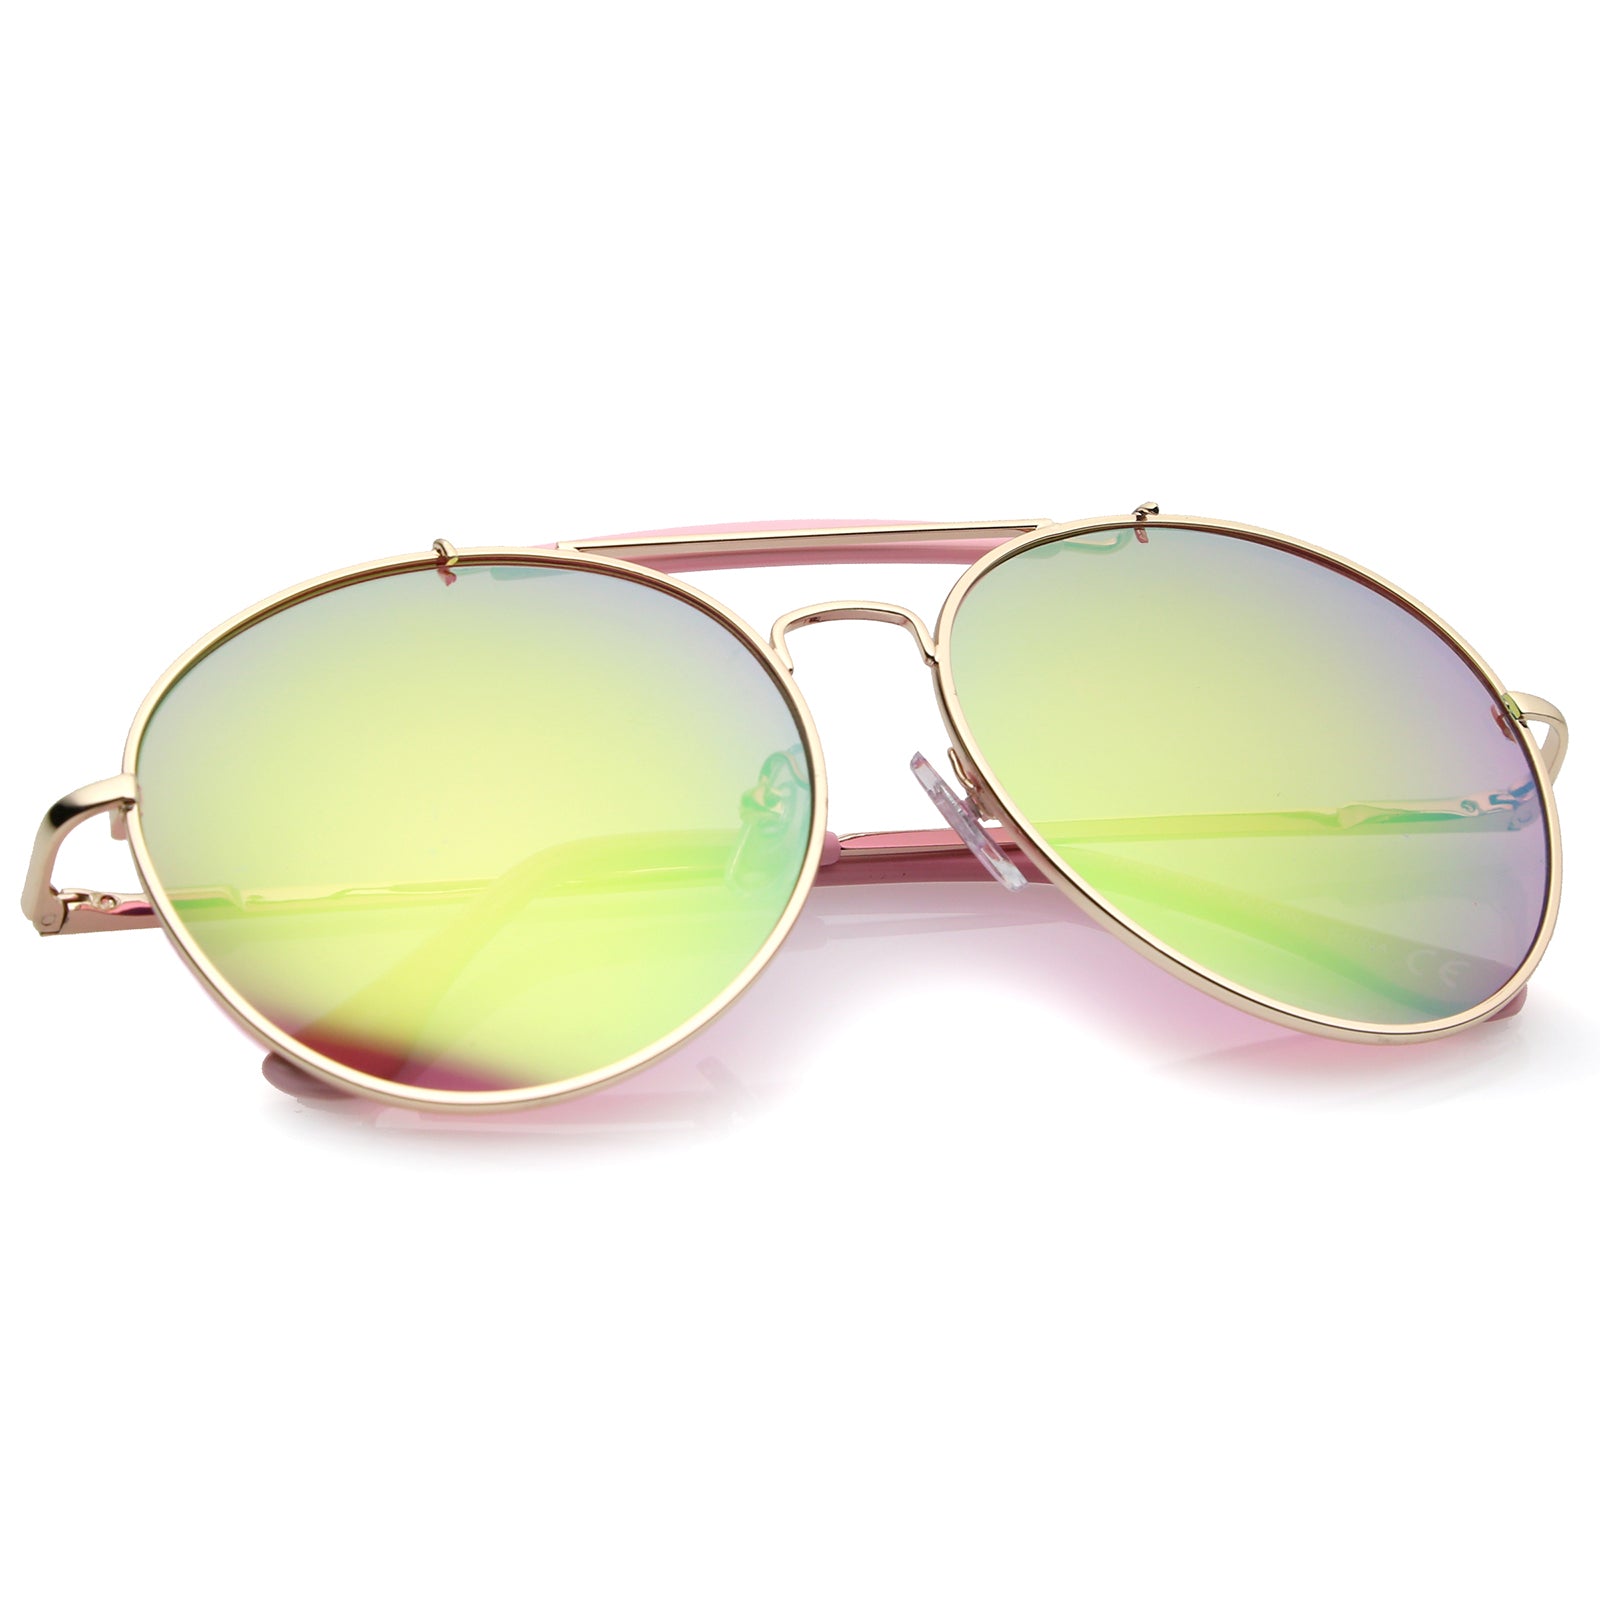 Amazon.com: Ray Ban RB3025 112/19 58mm Blue Green Mirror Aviator Sunglasses  Bundle-2 Items : Clothing, Shoes & Jewelry